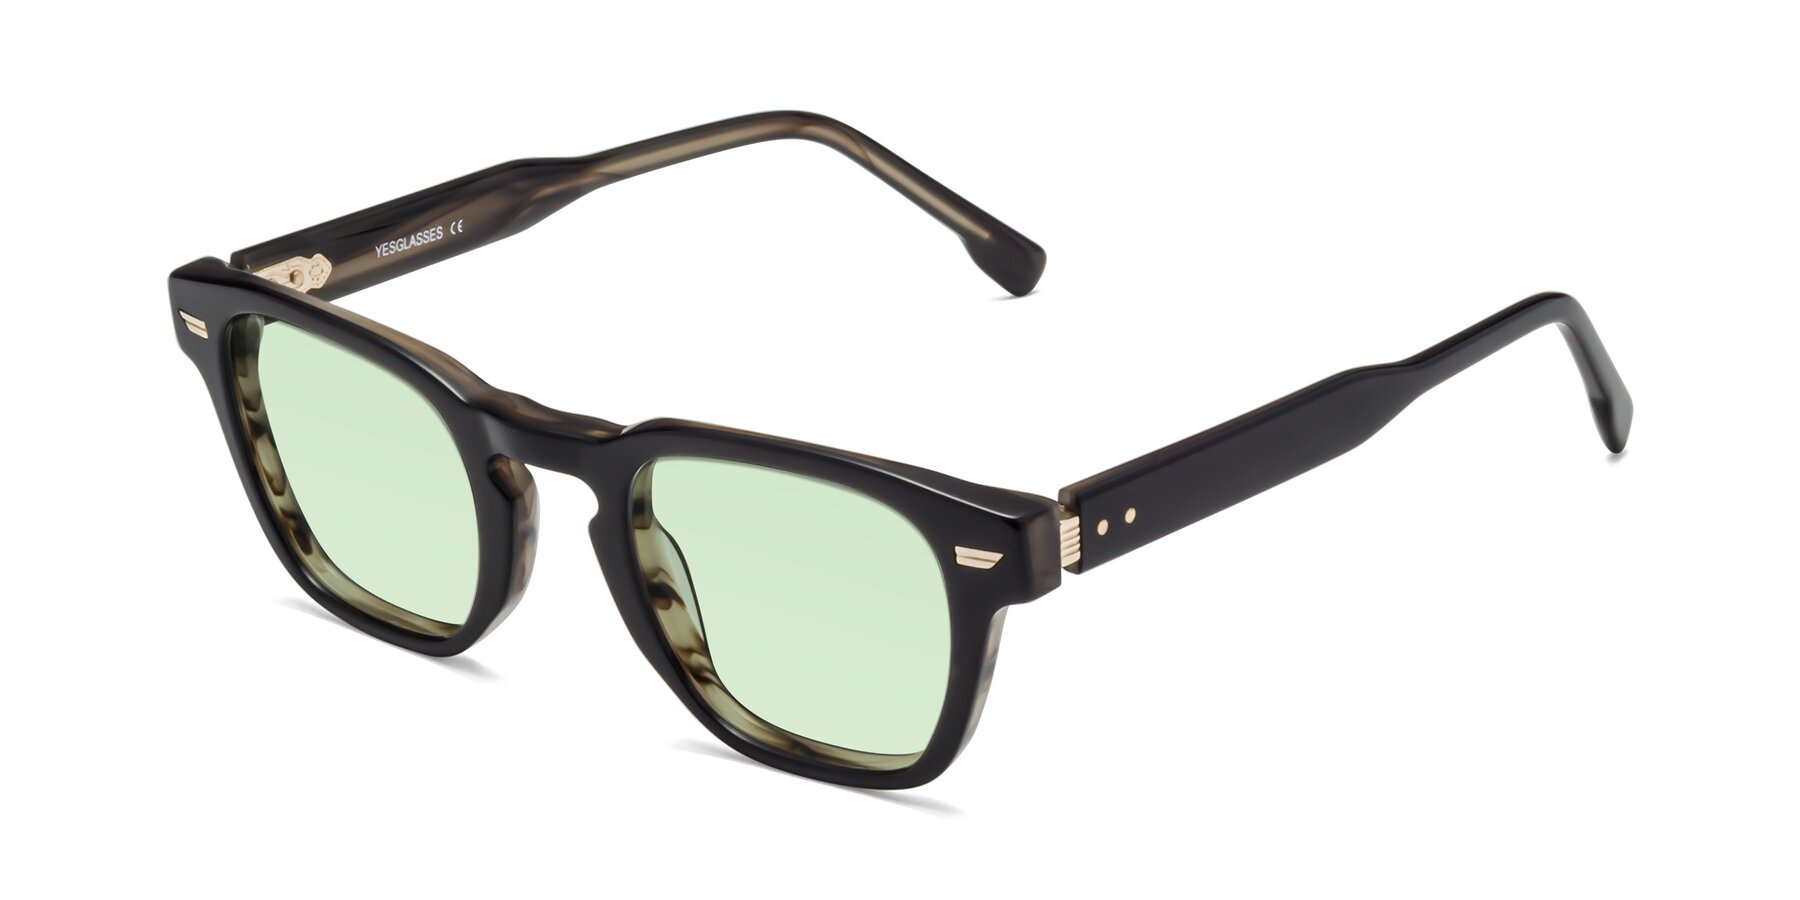 Angle of 1421 in Black-Stripe Brown with Light Green Tinted Lenses